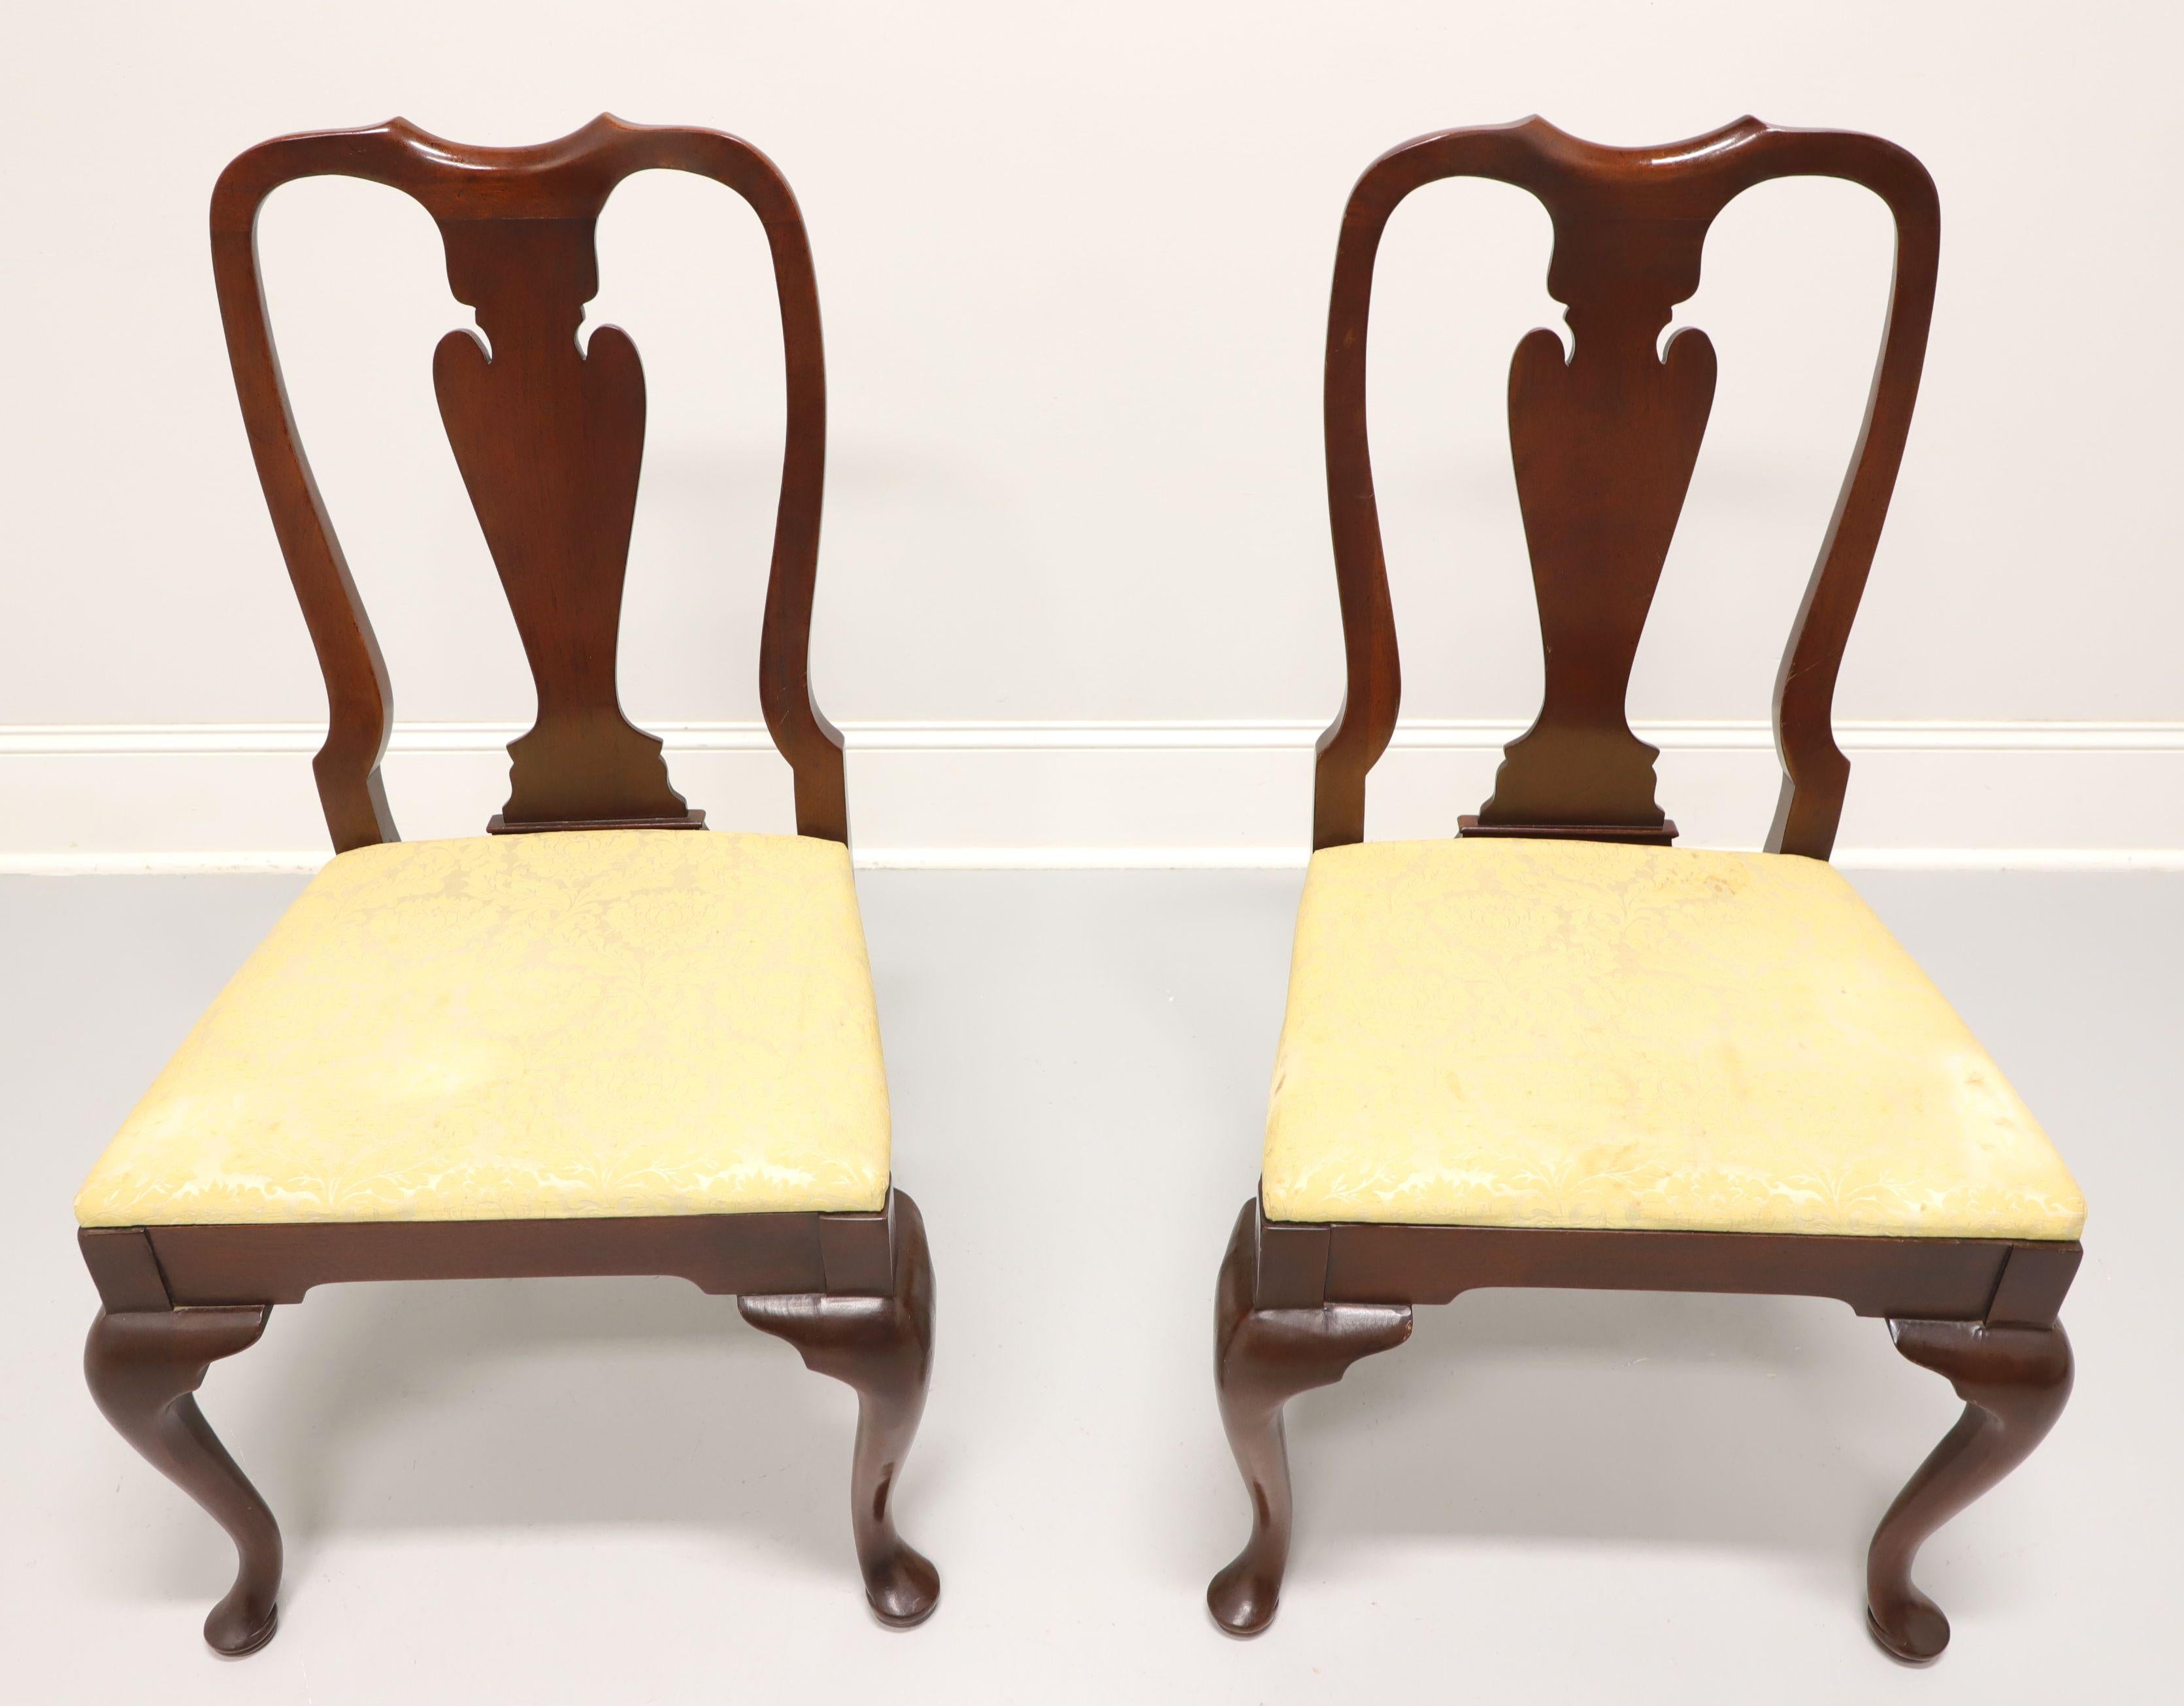 A pair of Queen Anne style dining side chairs by Hickory Chair. Mahogany with solid carved back, a creamy yellow fabric upholstered seat, cabriole legs and pad feet. Made in North Carolina, USA, in the late 20th century.

Measures: Overall: 22.25w